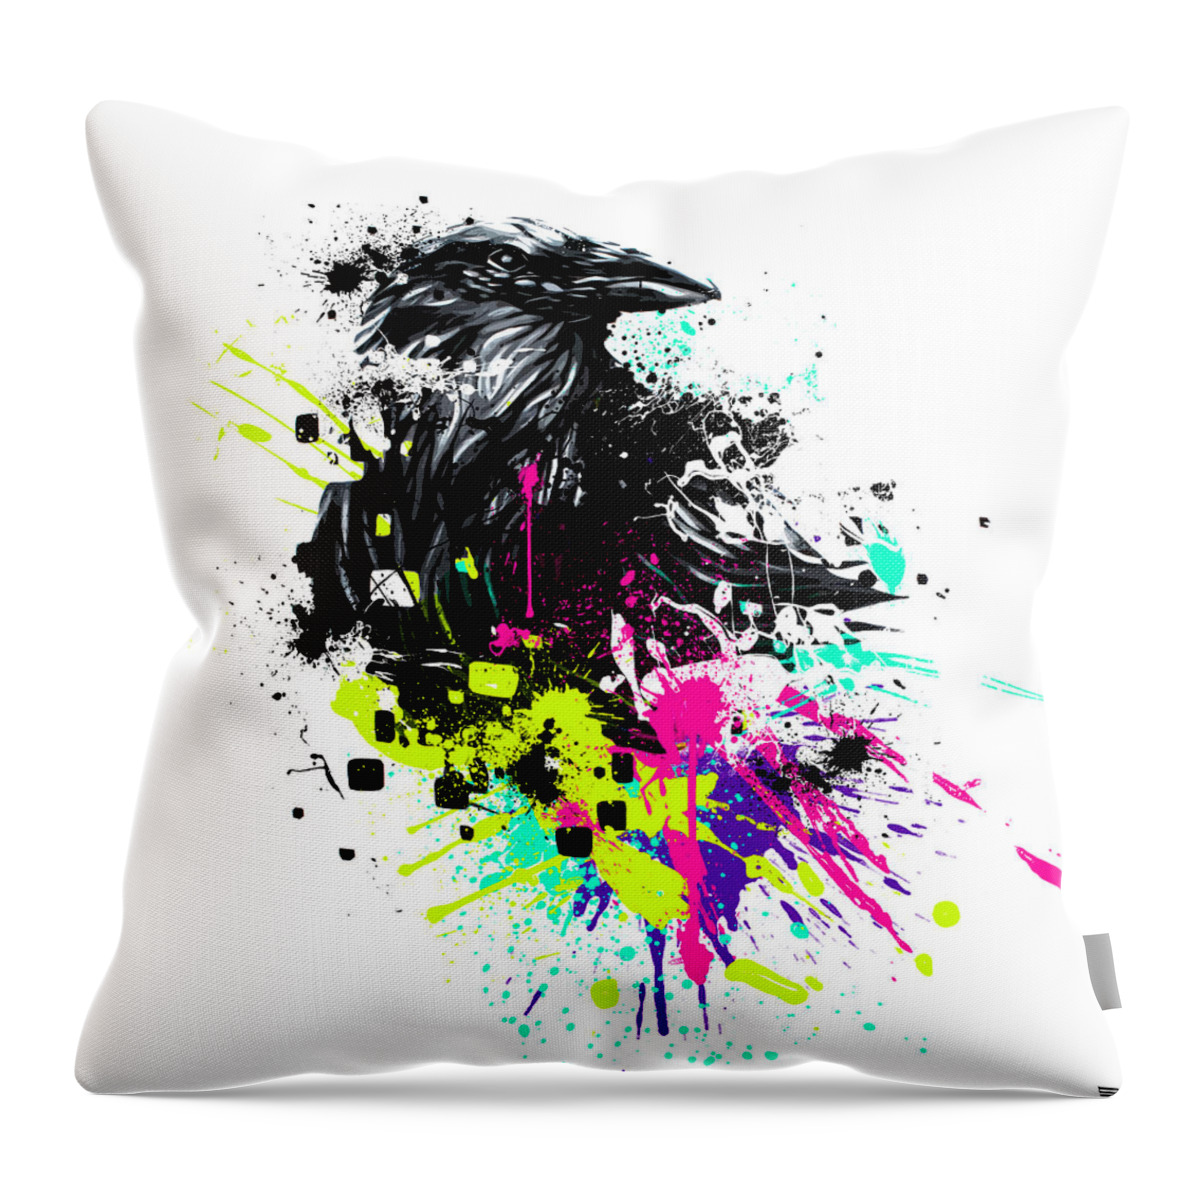 Raven Throw Pillow featuring the digital art Painted Raven by Jeremy Scott